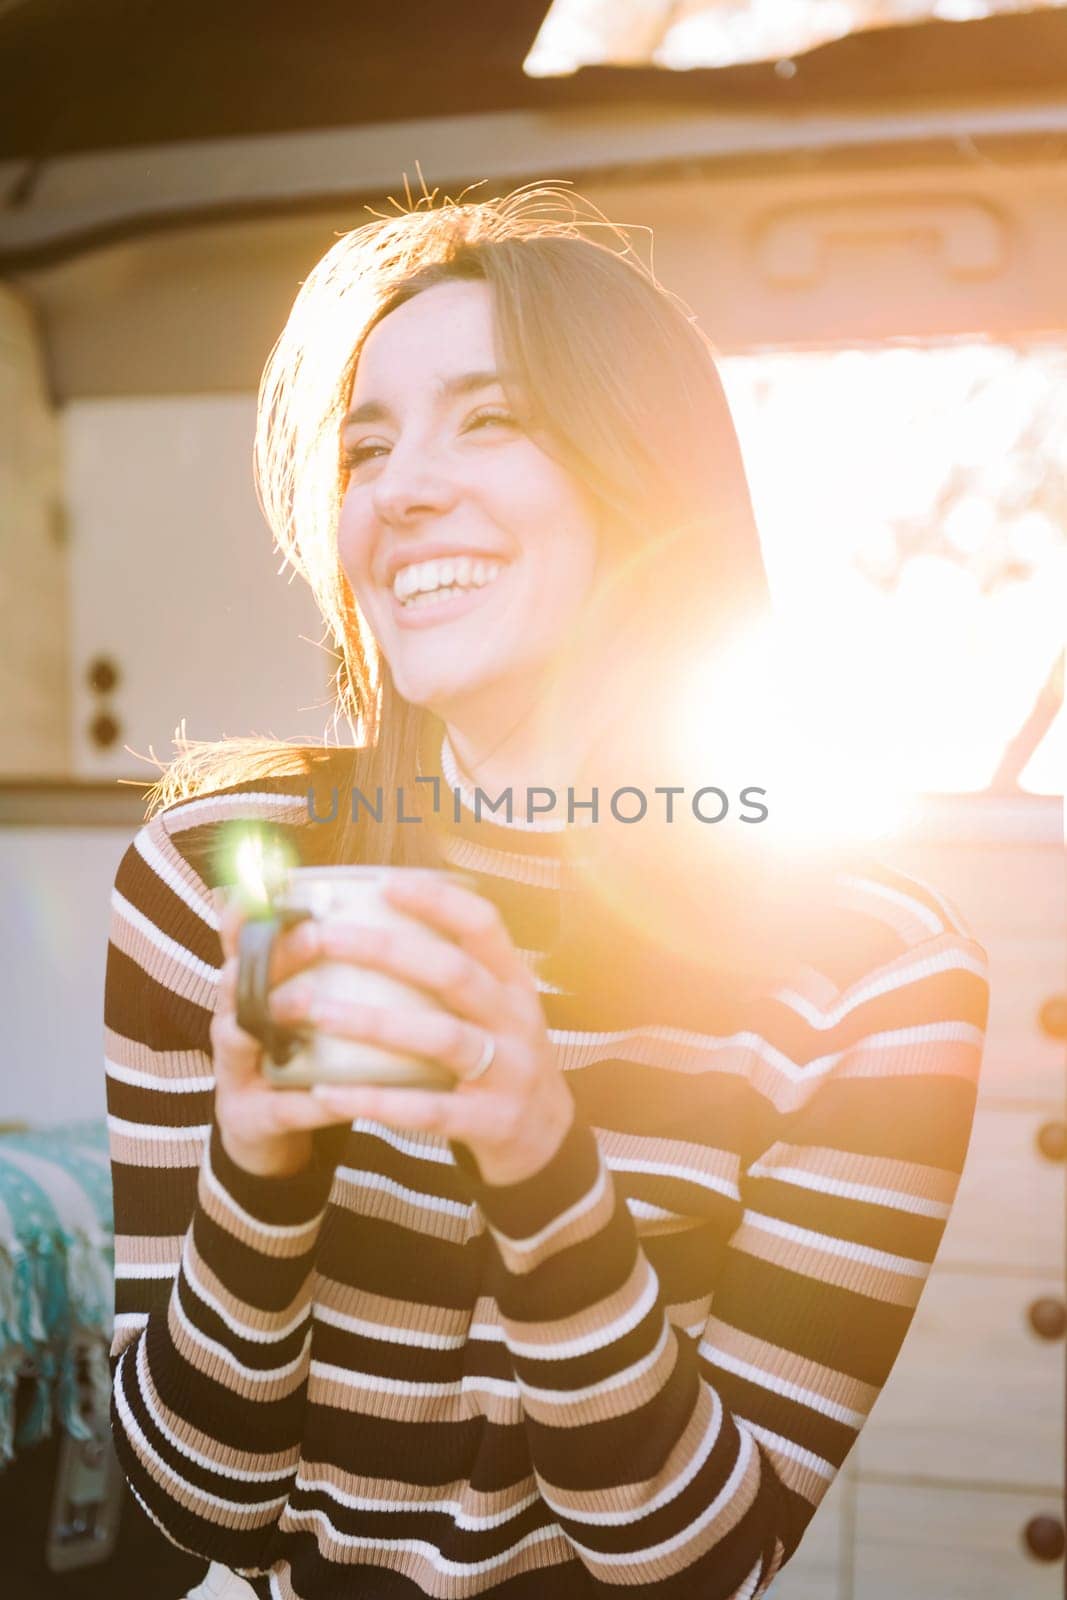 young woman laughing happy sitting in a camper van drinking a cup of coffee at sunset, concept of van life and weekend getaway